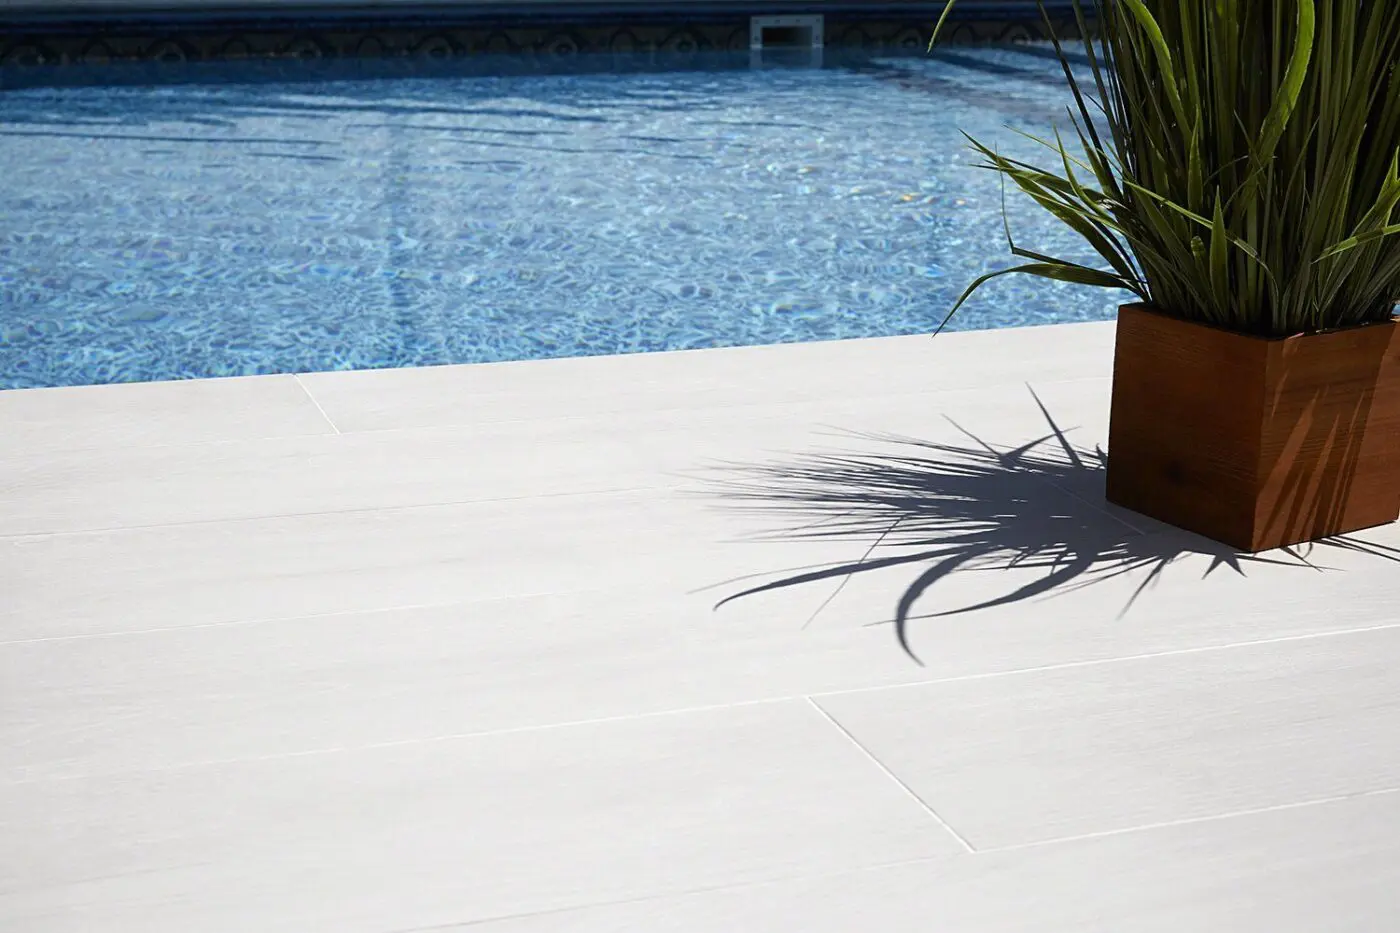 Close-up of a poolside area in Pembroke Pines, FL, with light-colored tile flooring. A potted green plant in a wooden planter casts a shadow on the tiles, and the clear blue water of the pool is visible in the background. Contact us for a free quote to enhance your space with our concrete solutions.